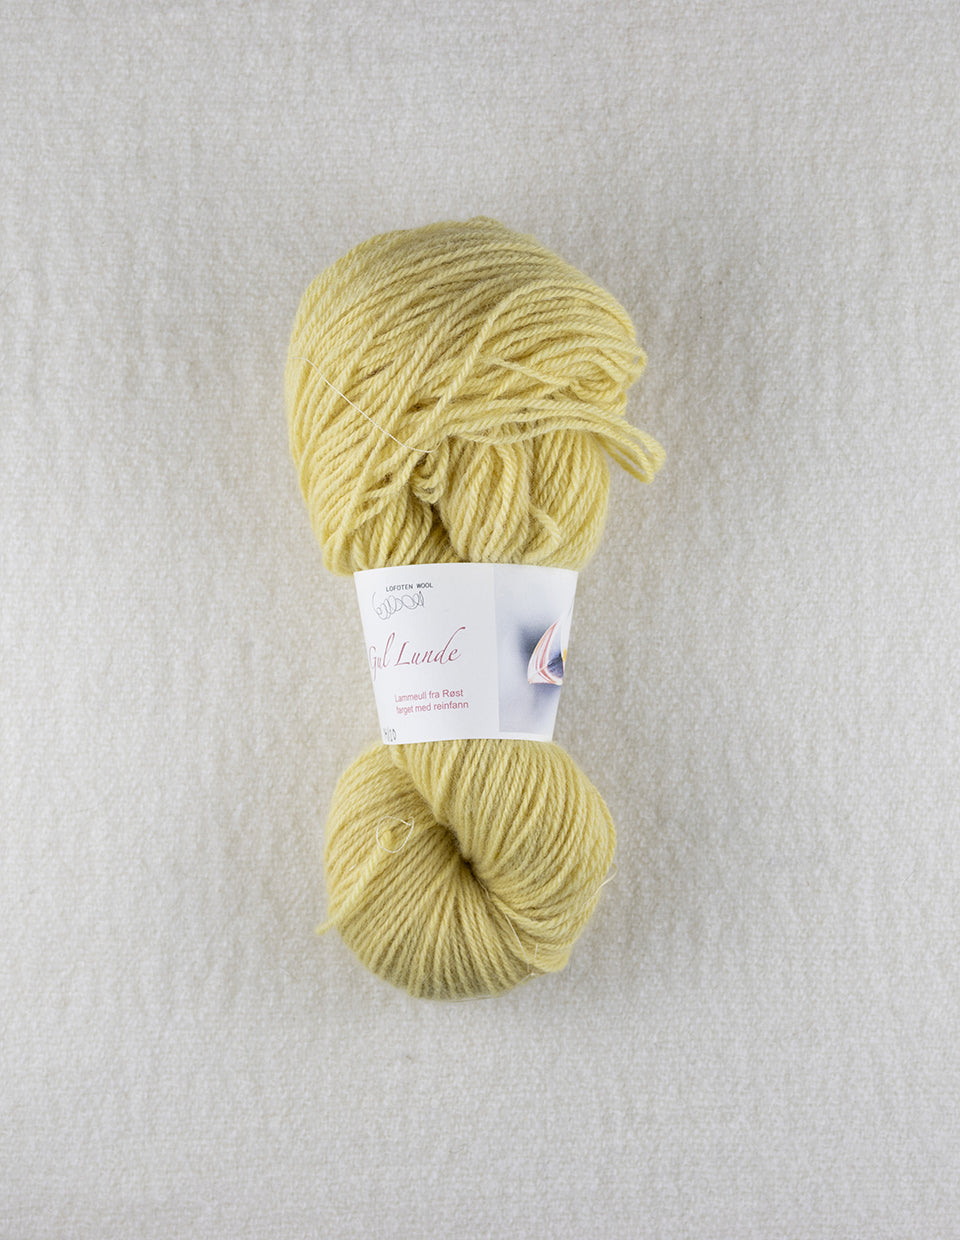 Gul Lunde 3 ply, 50/100g (Yellow Puffin) 